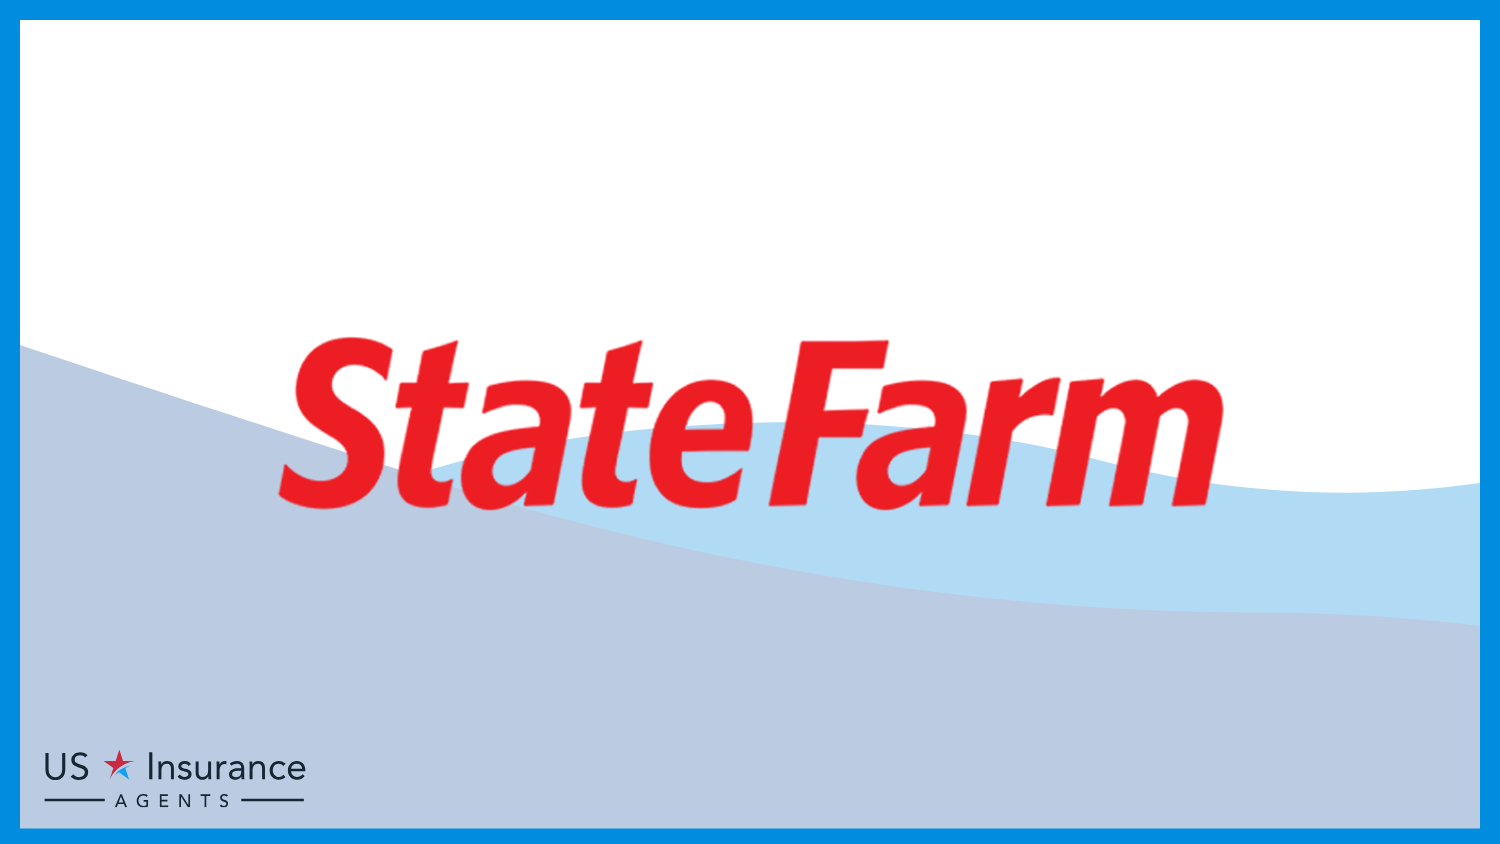 State Farm: Best Business Insurance for Financial Services